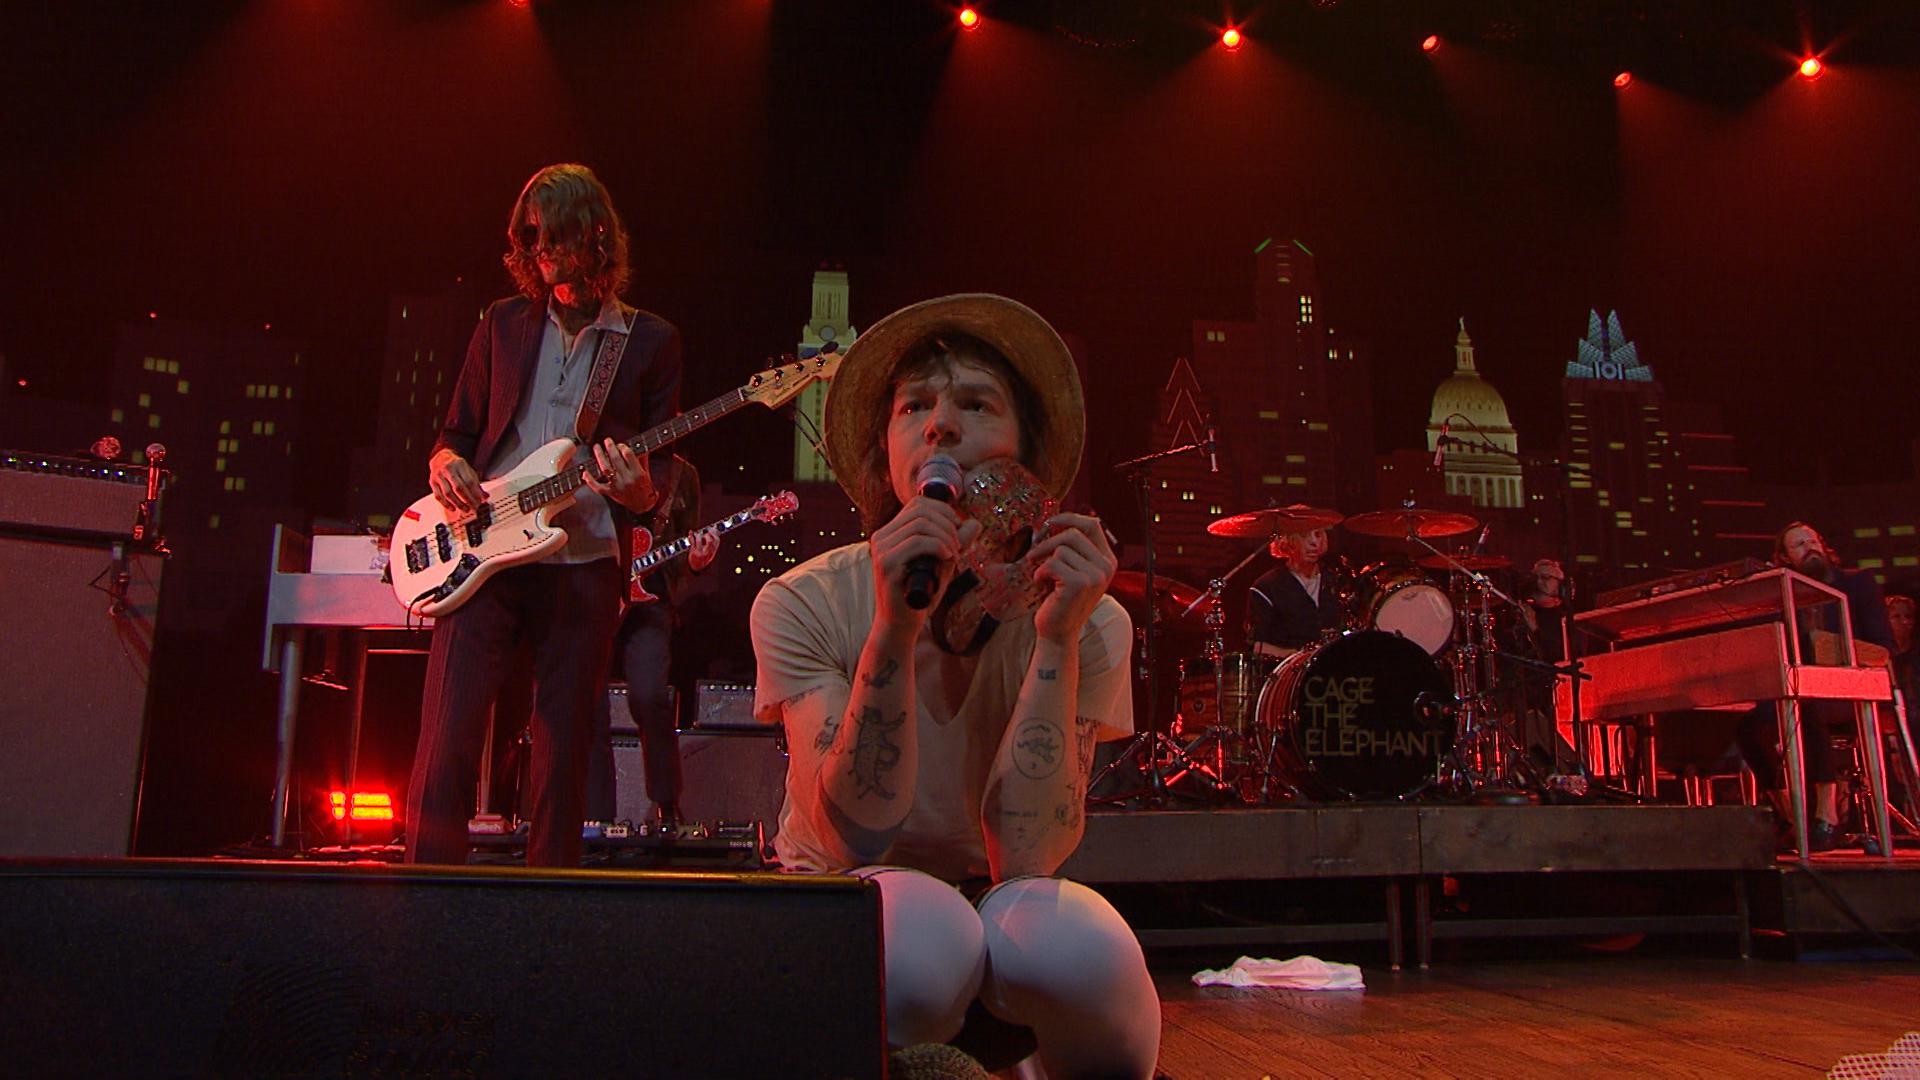 Cage the Elephant - Cage The Elephant on Austin City Limits 